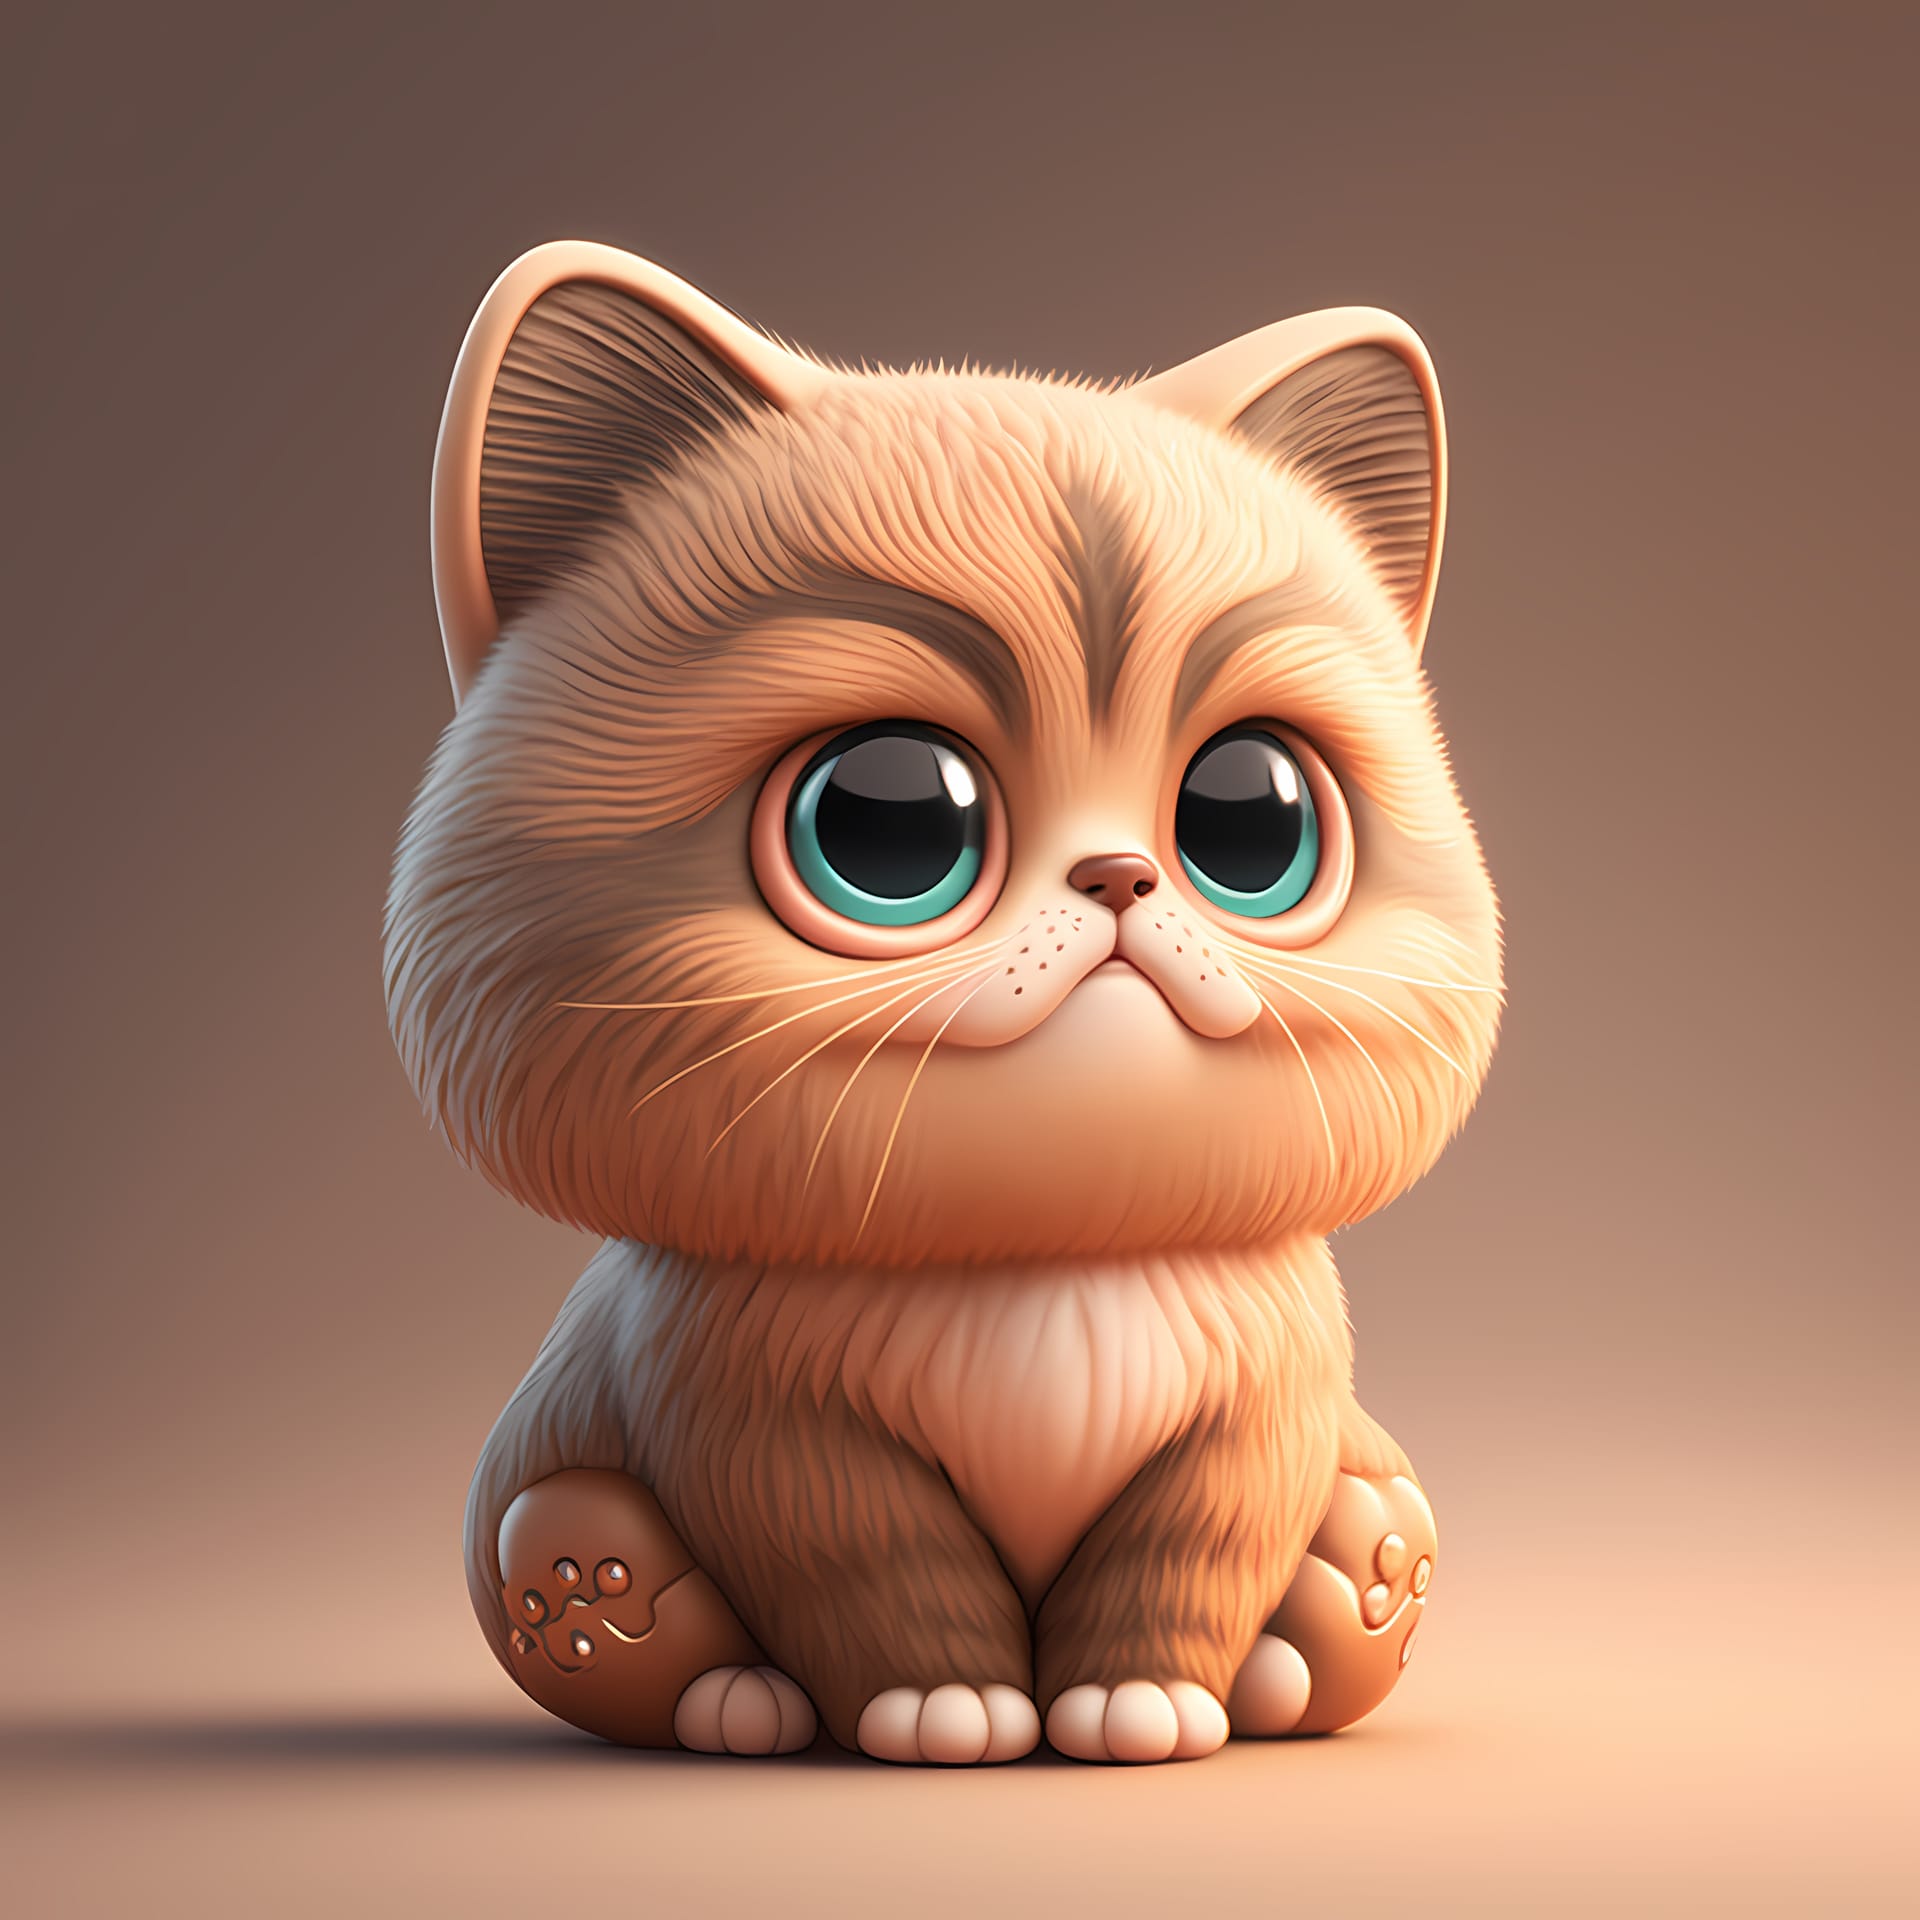 Adorable cute chubby cat 3d render graceful image